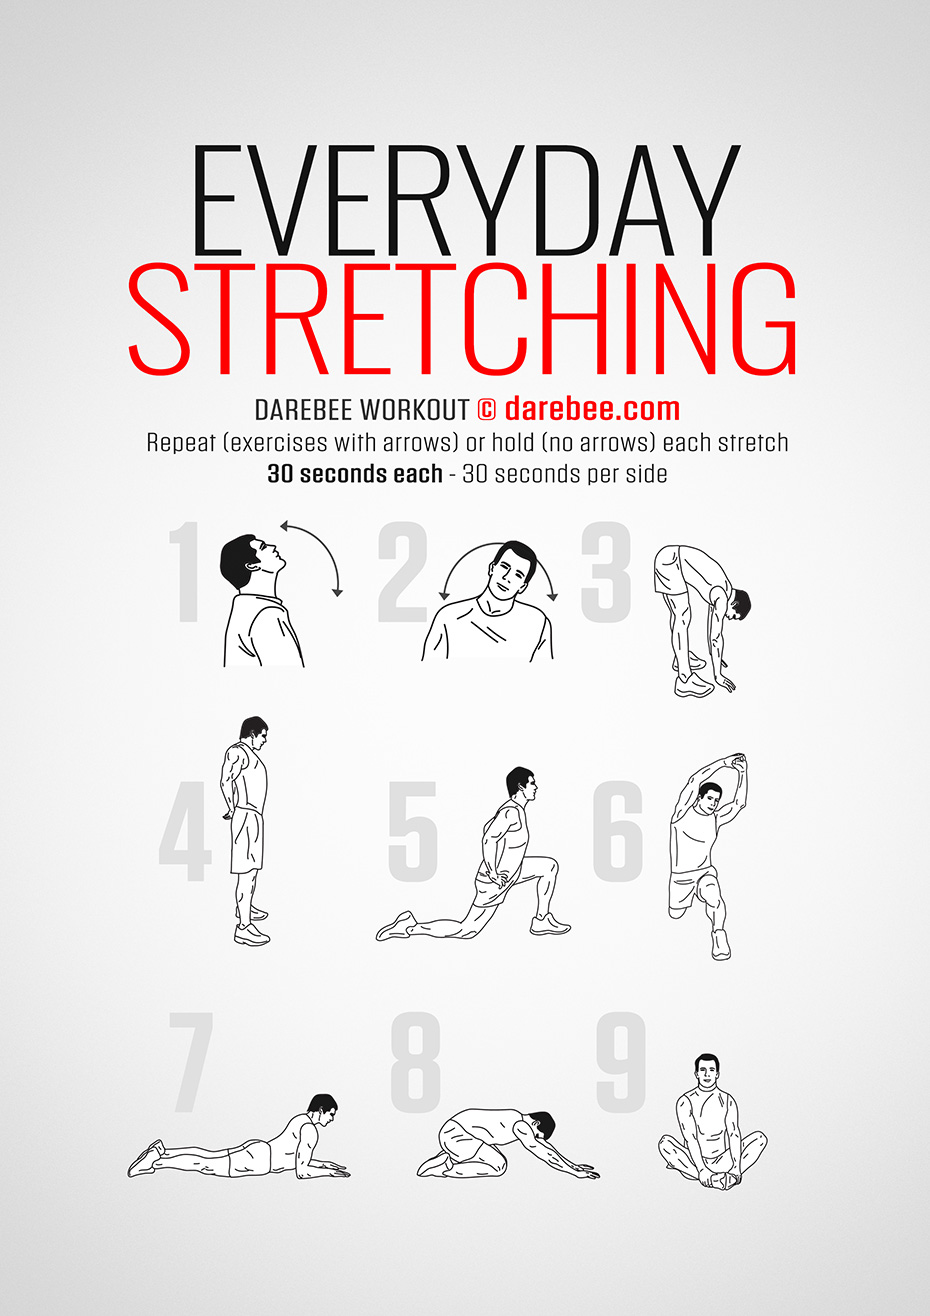 Everyday Stretching - DAREBEE Workout